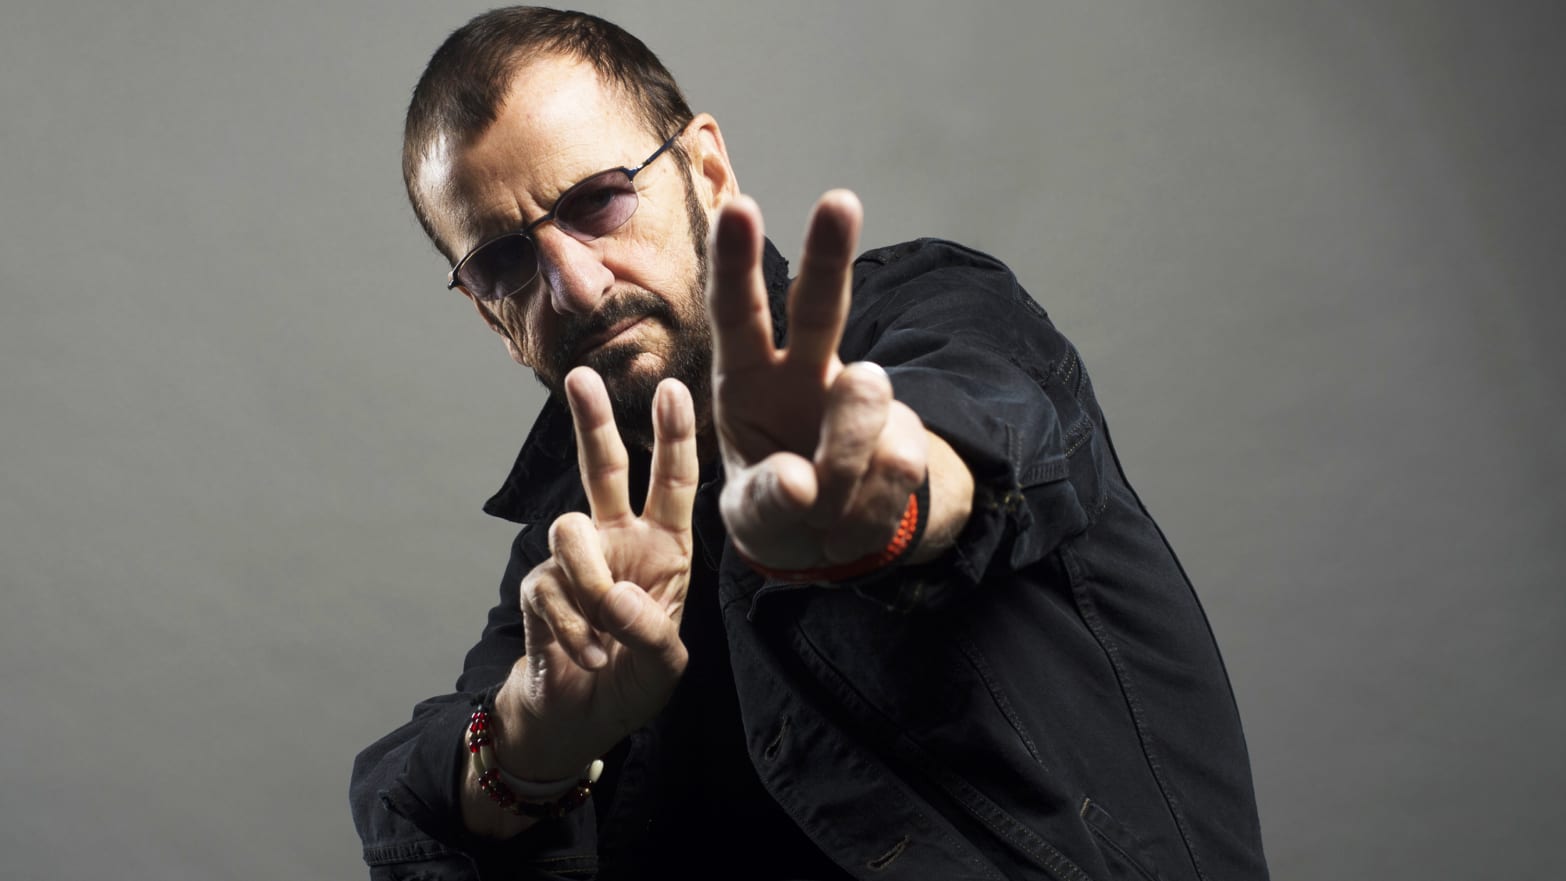 Ringo Starr Reflects on Our Troubled Times ‘I Wish the Whole World Was